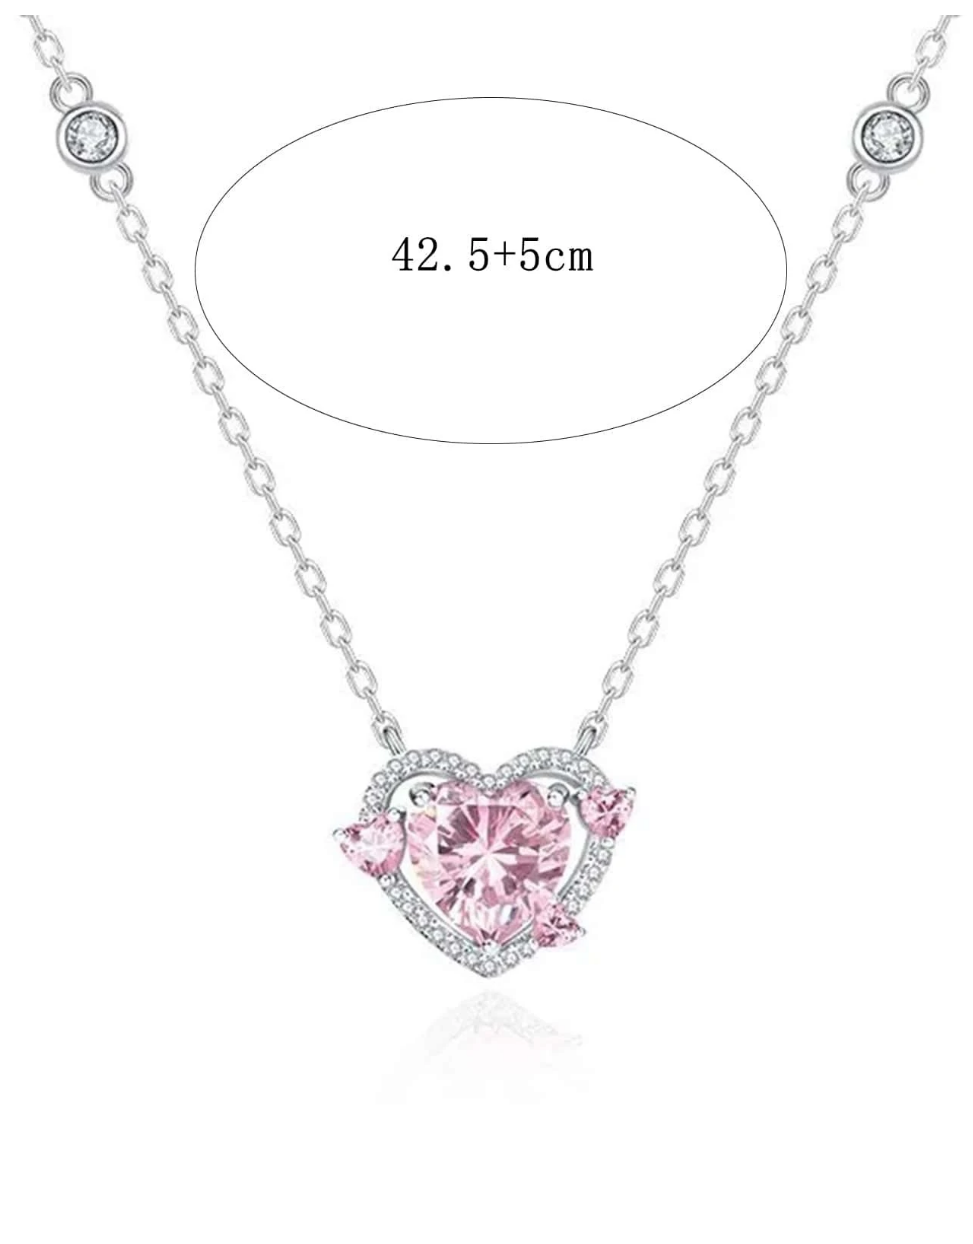 Dazzling Love: Y2K Silver Heart Pendant Necklace with Glass Rhinestone Decor – Perfect Dating Gift for Women!